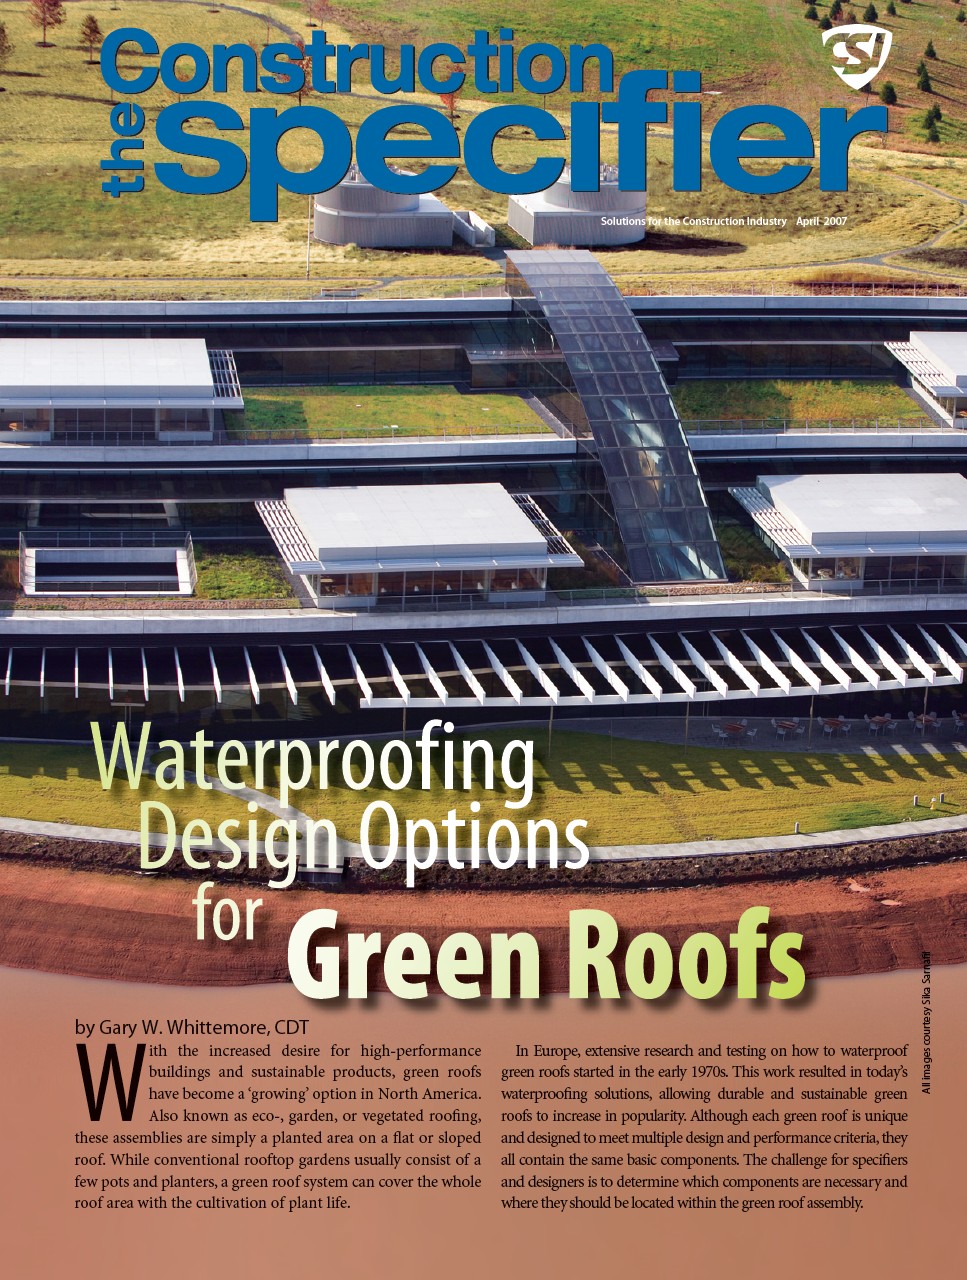 Waterproofing design options for Green Roofs